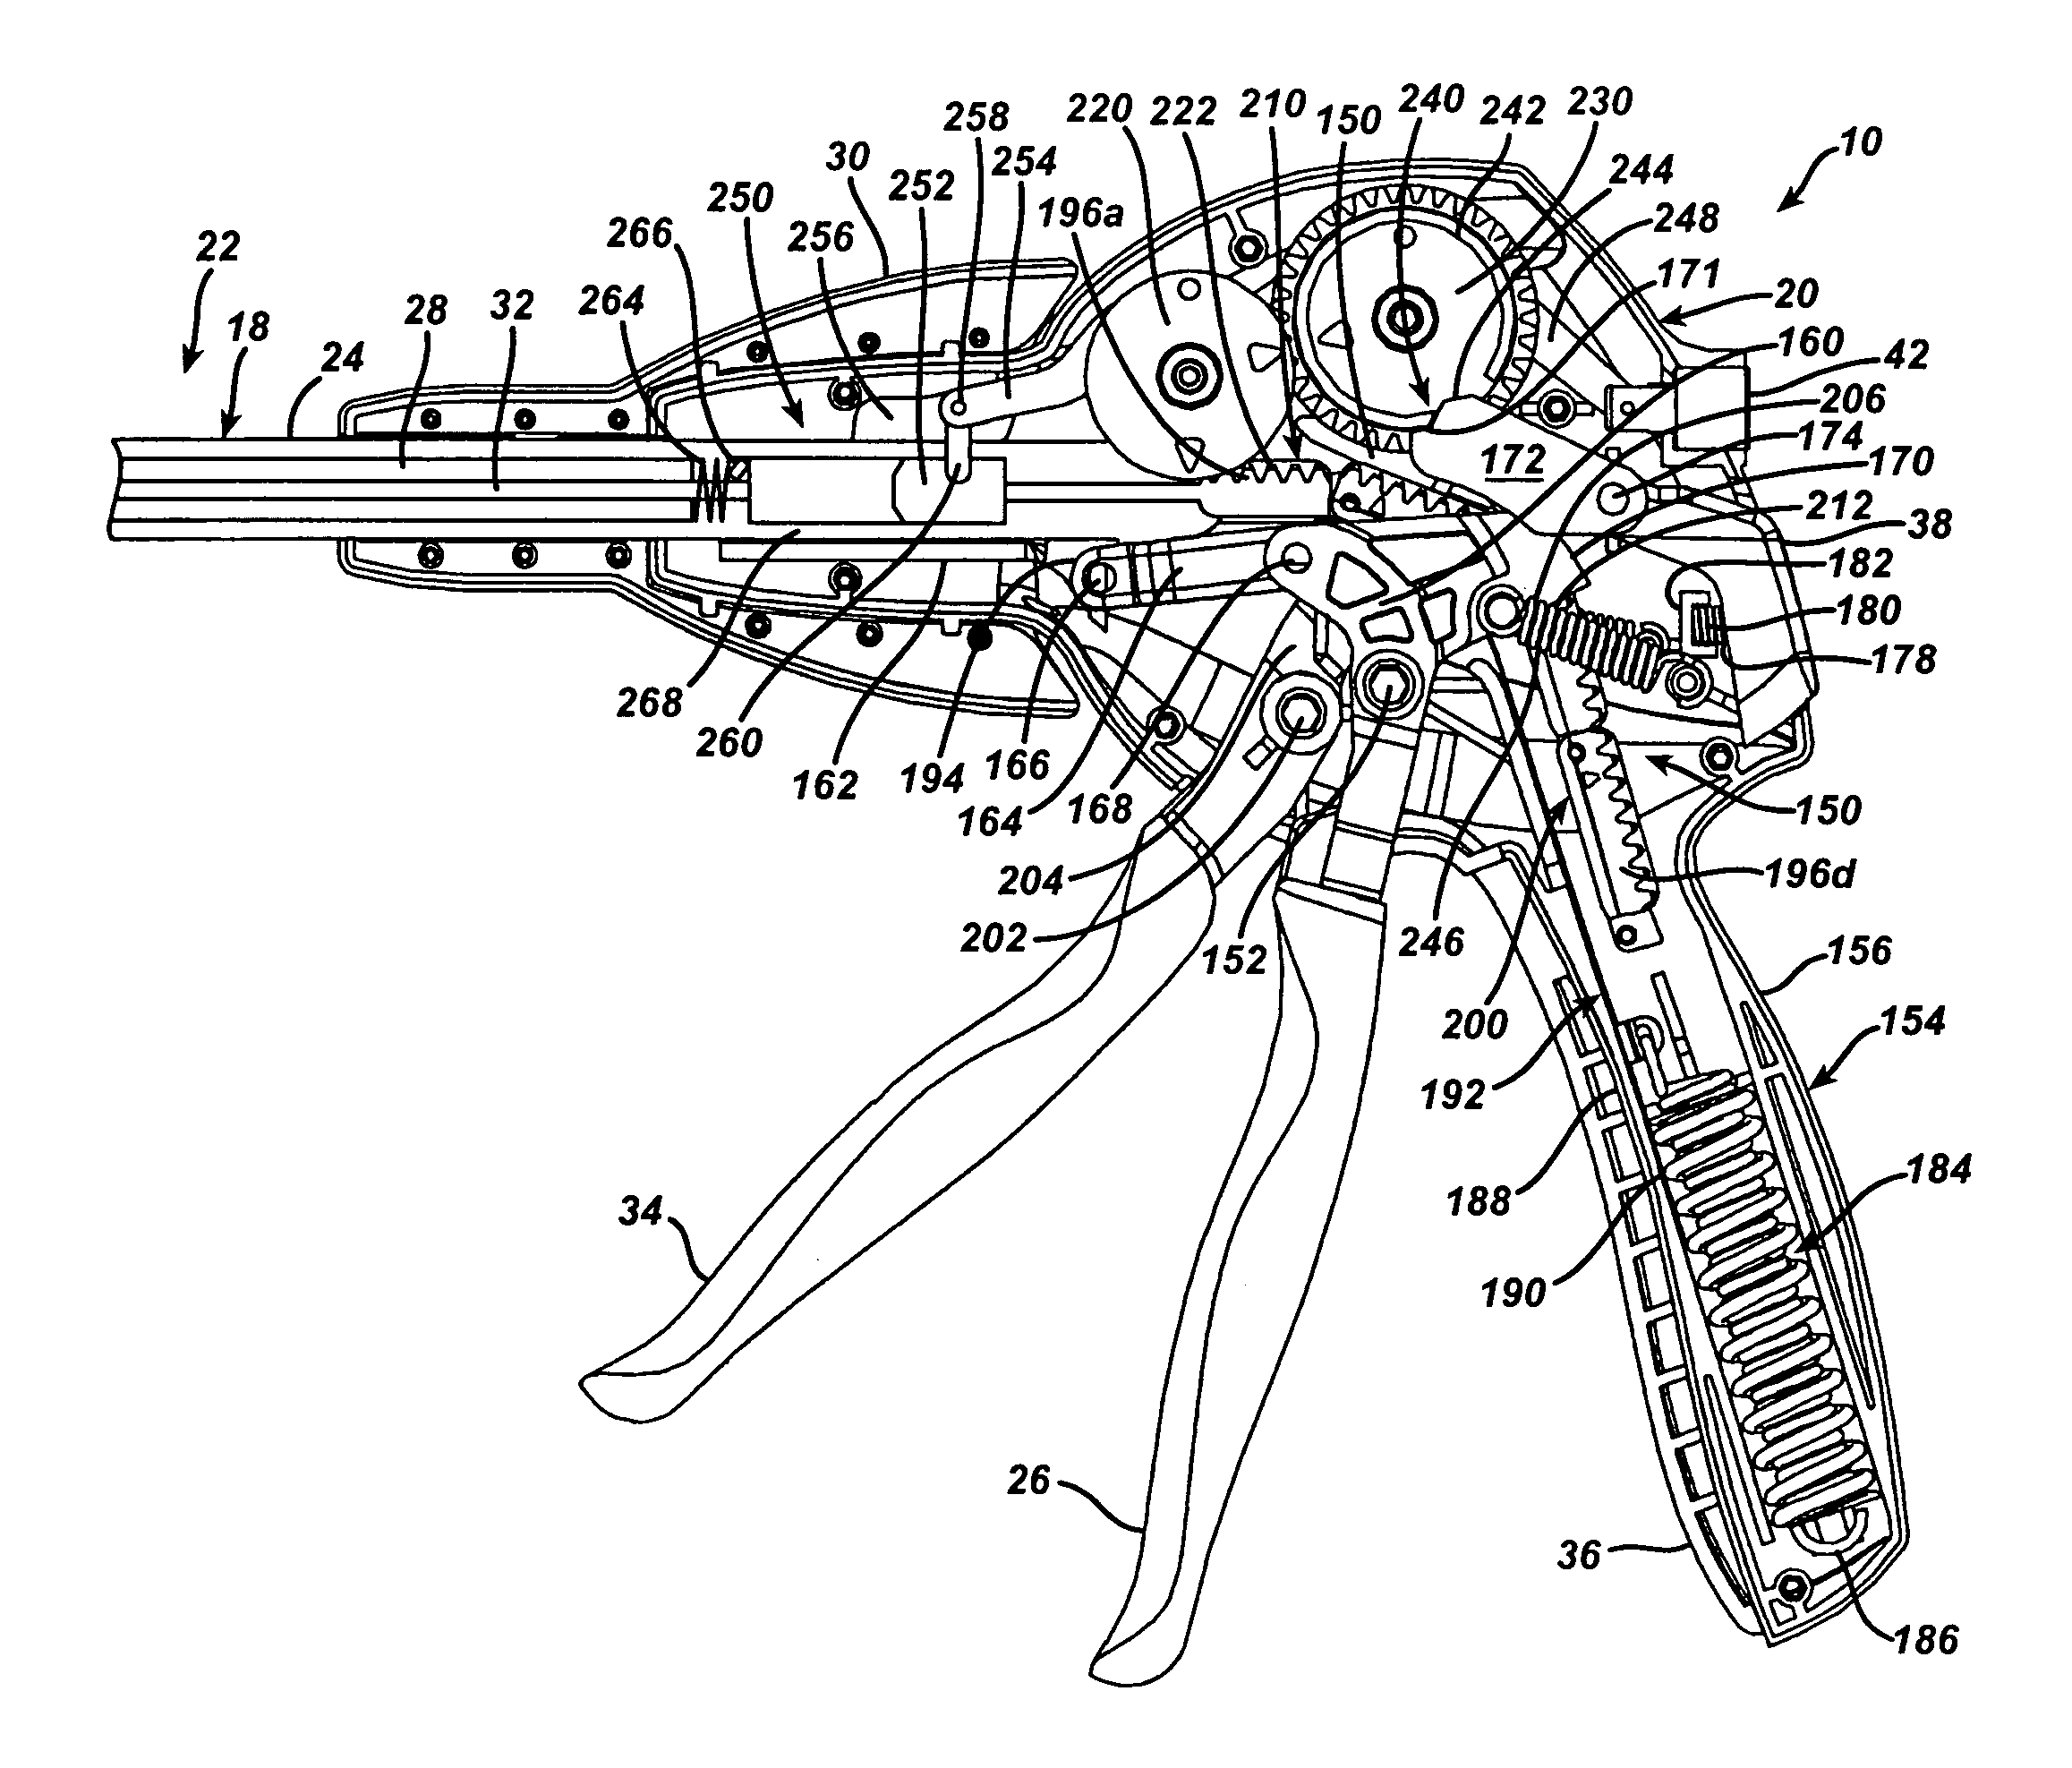 Surgical stapling instrument incorporating a firing mechanism having a linked rack transmission